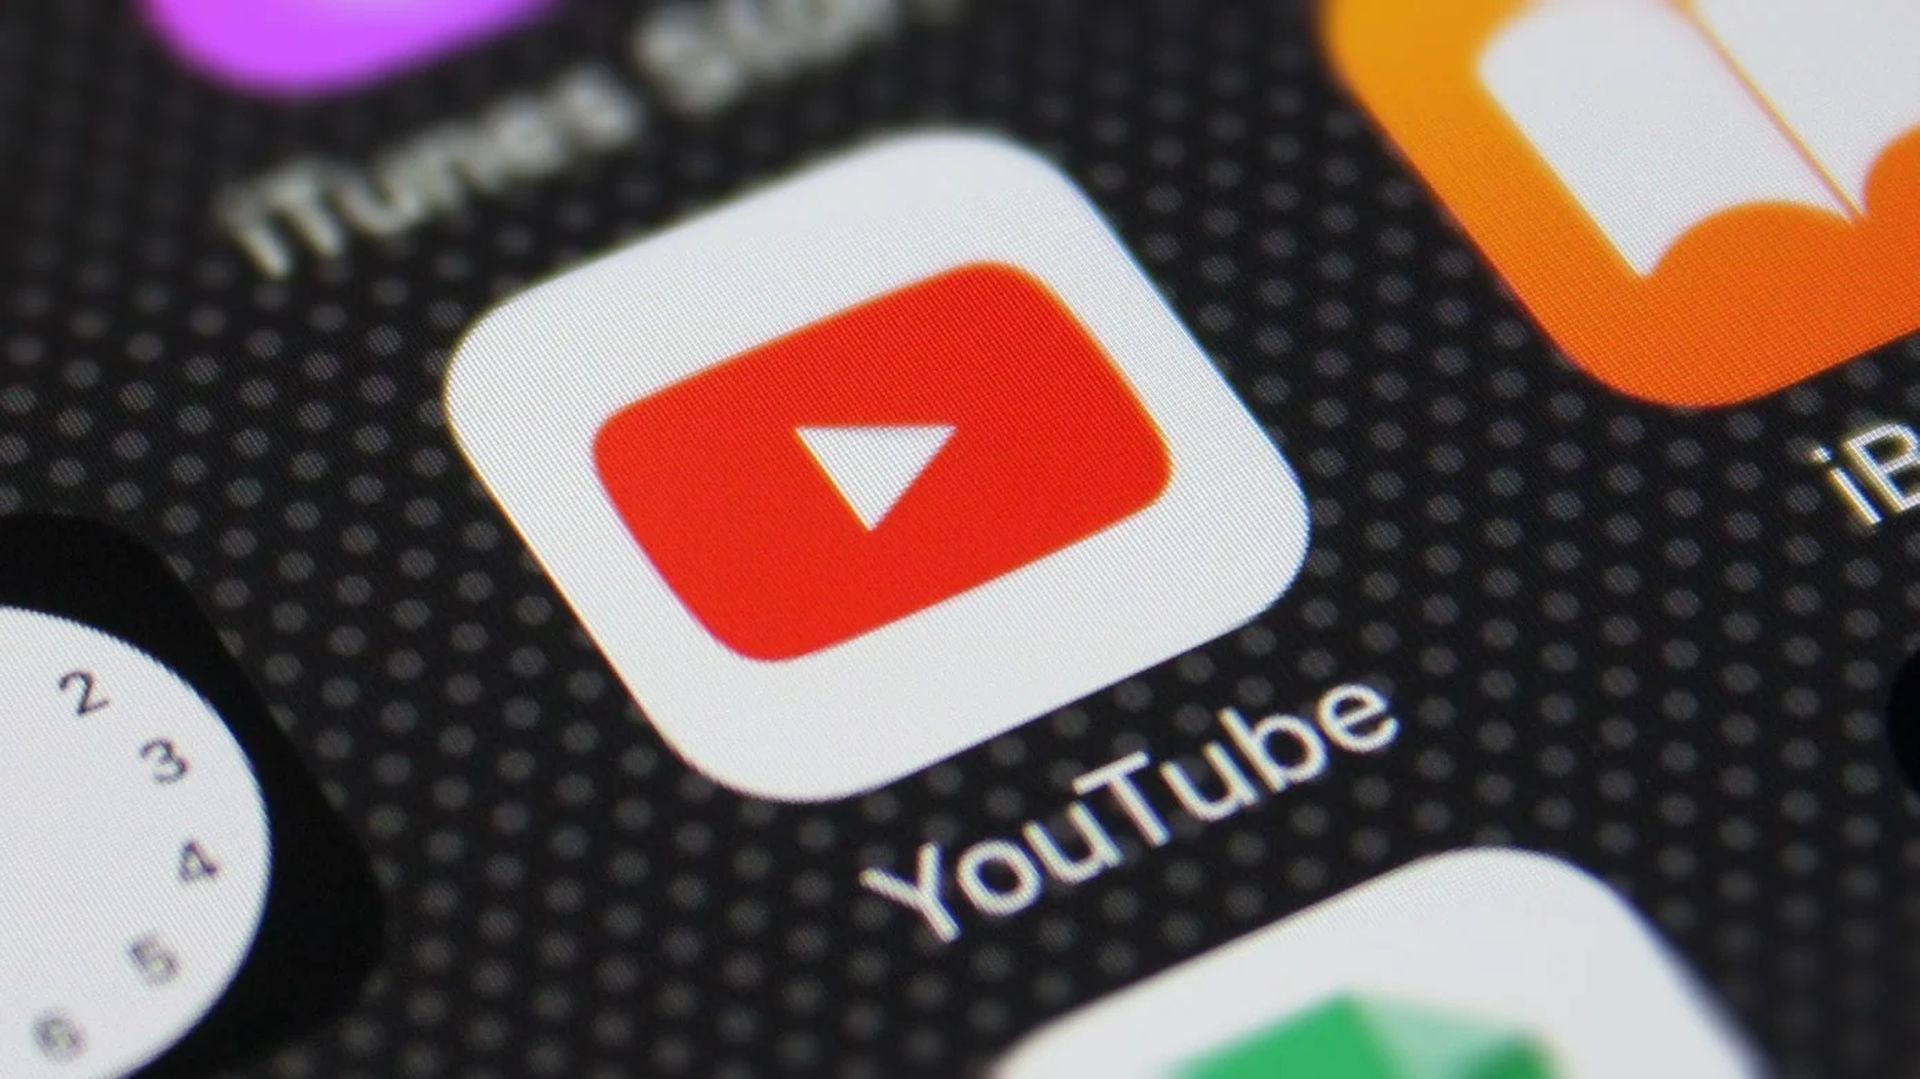 With the current layoffs and a lawsuit plaguing them, YouTube and Google ad revenue took a plunge. Google reported advertising revenues of US$59.04 billion,...